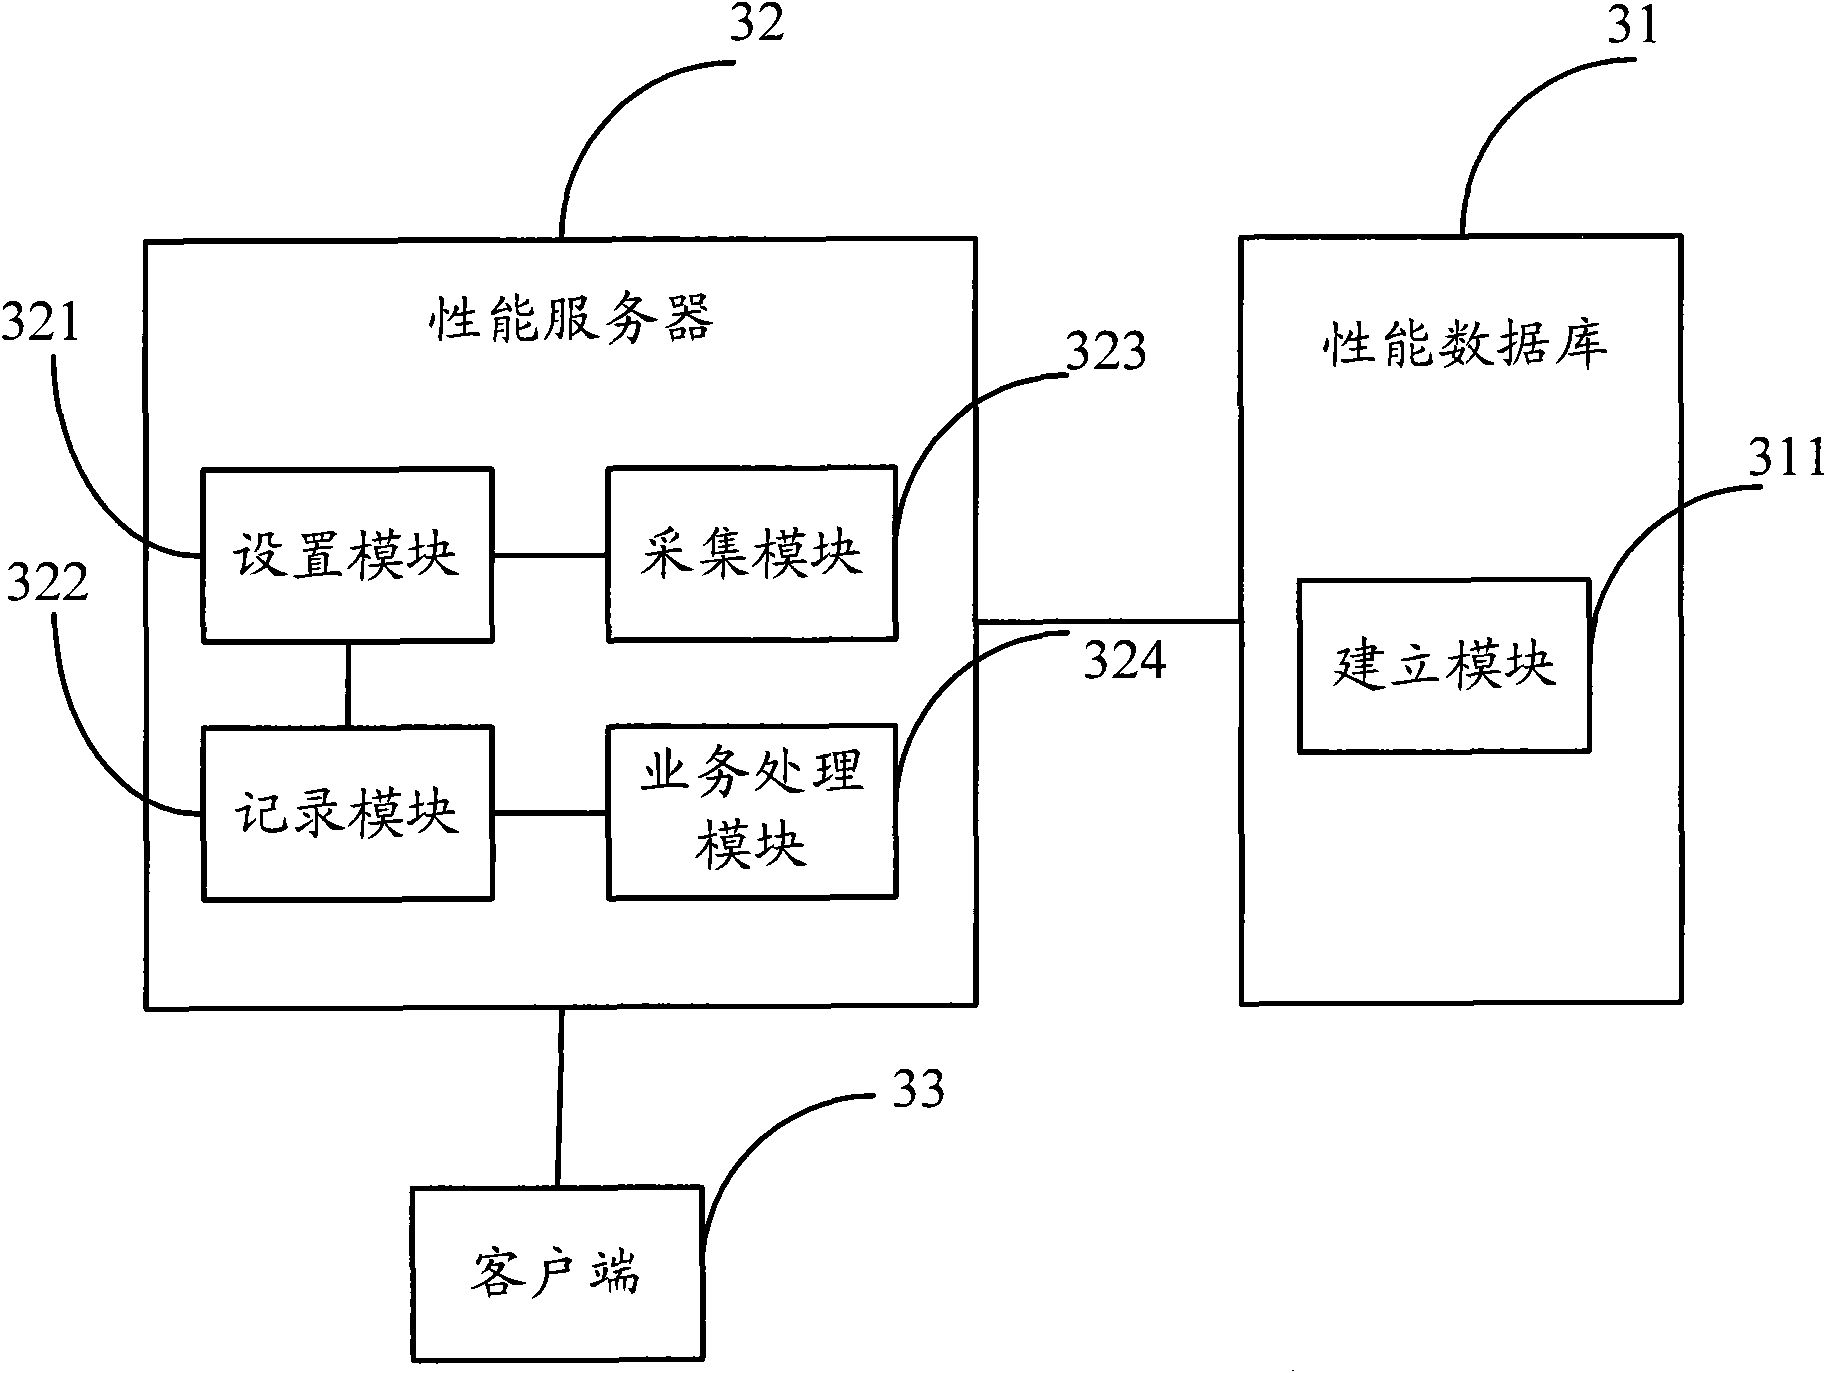 Method for memorizing data and network management system